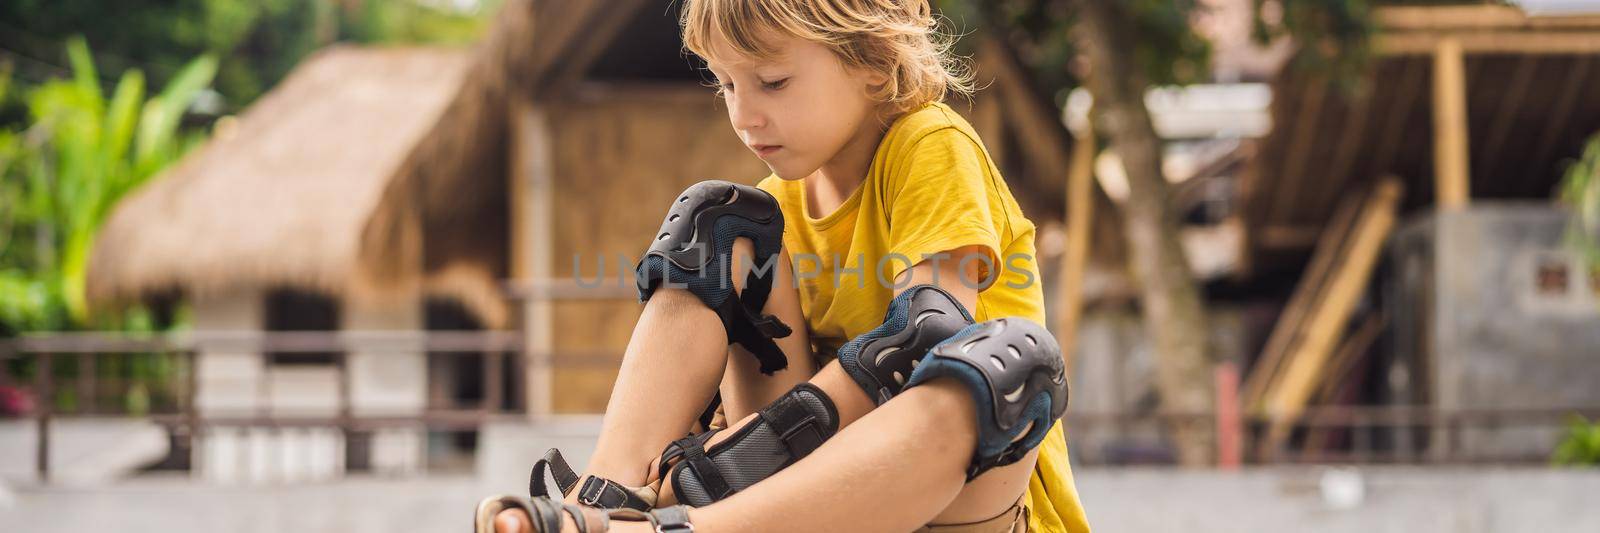 Boy puts on knee pads and armbands before training skate board BANNER, LONG FORMAT by galitskaya